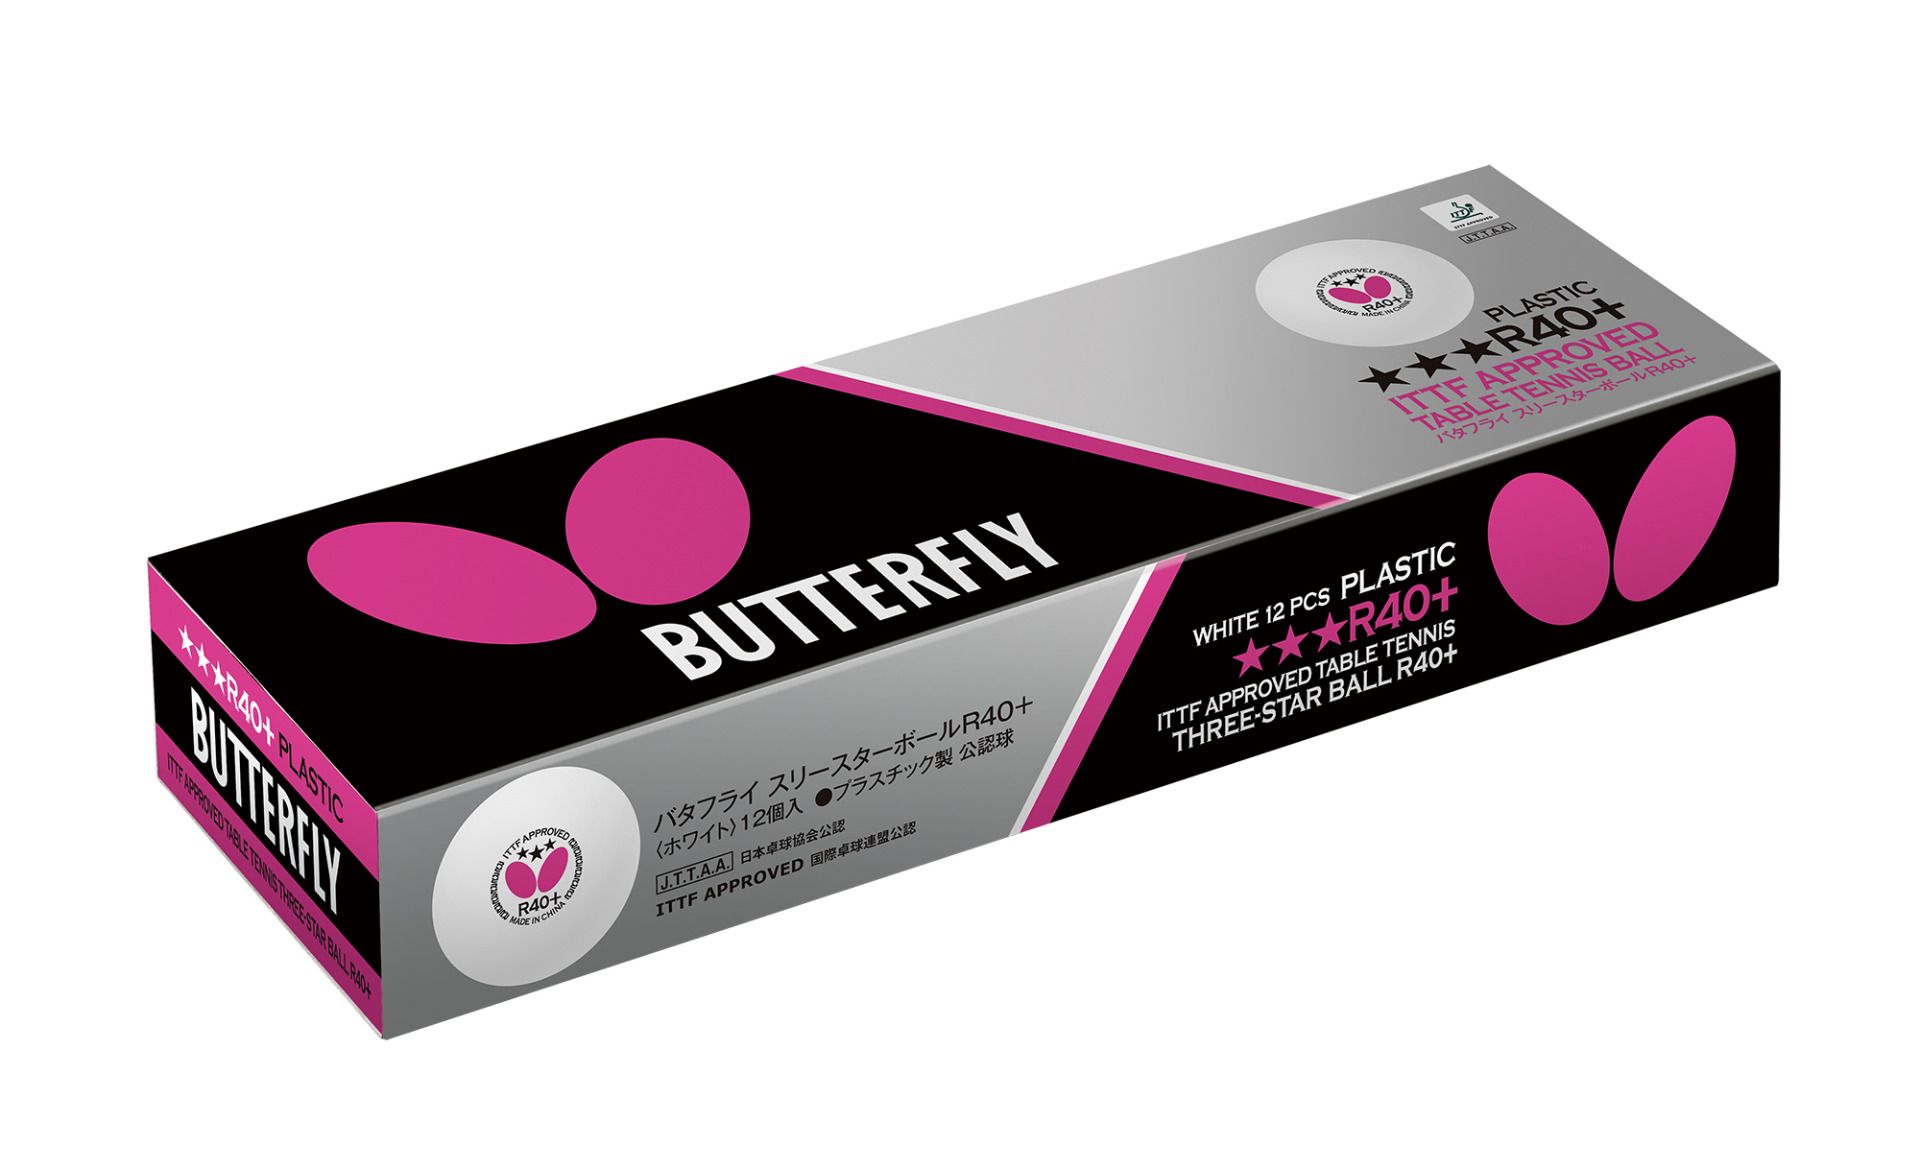 Butterfly R40+ 3-Star 12-pack